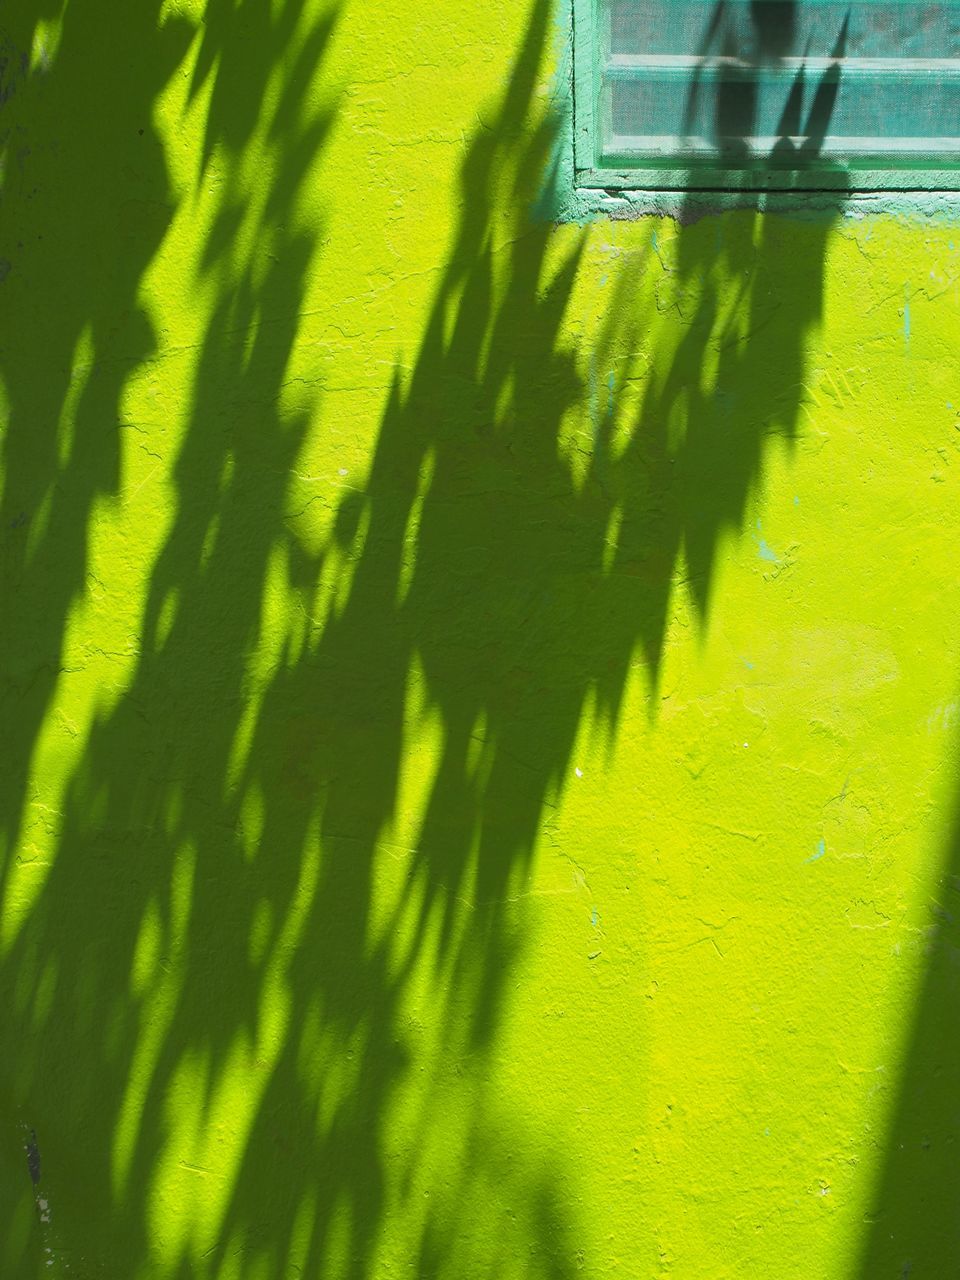 green color, shadow, sunlight, day, growth, no people, yellow, nature, tree, close-up, built structure, outdoors, architecture